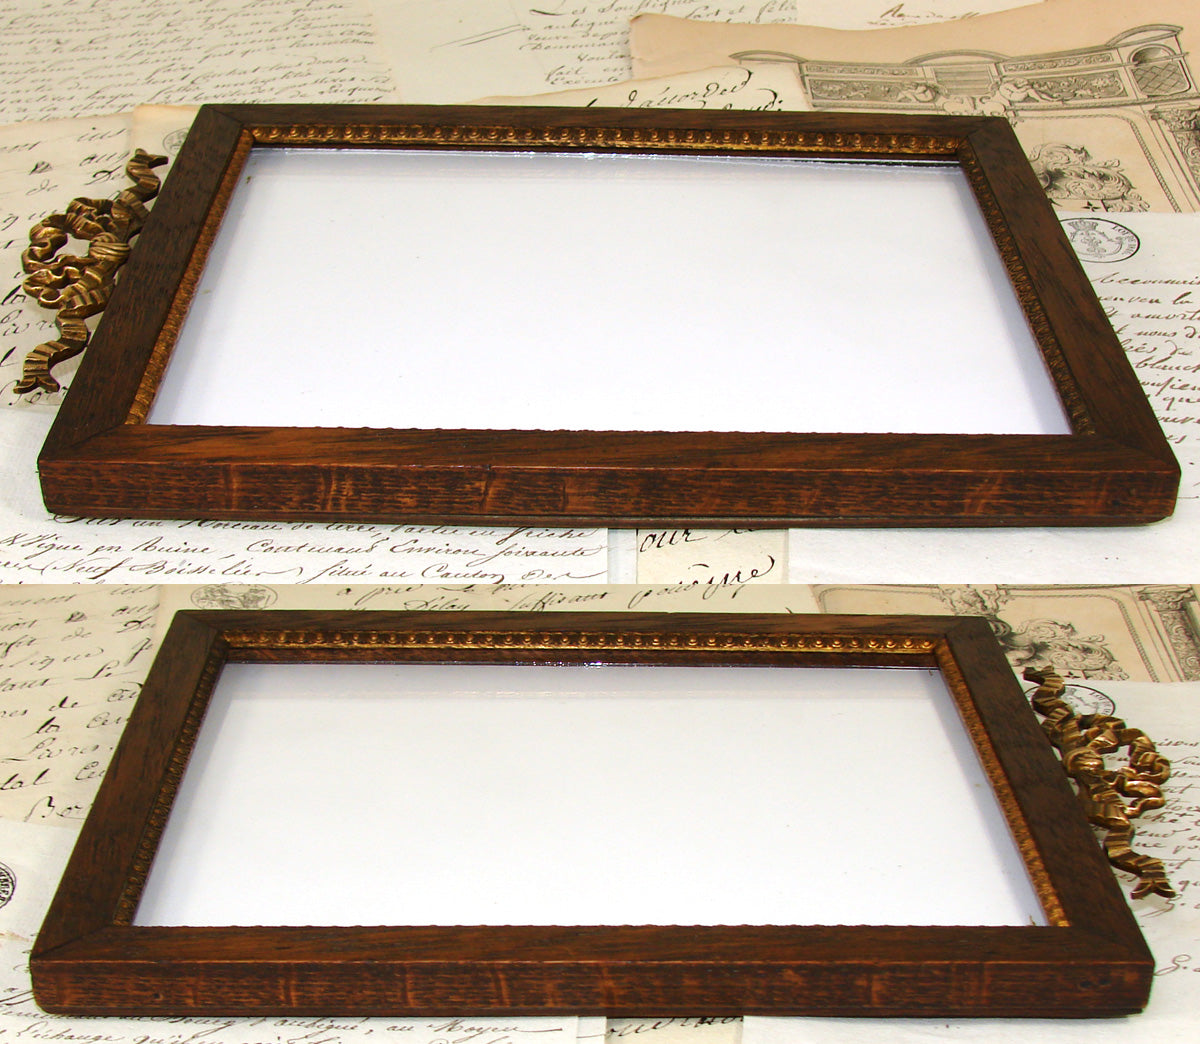 Antique French Empire Revival Style 10.75" Picture Frame, Signed E. Legros, Paris